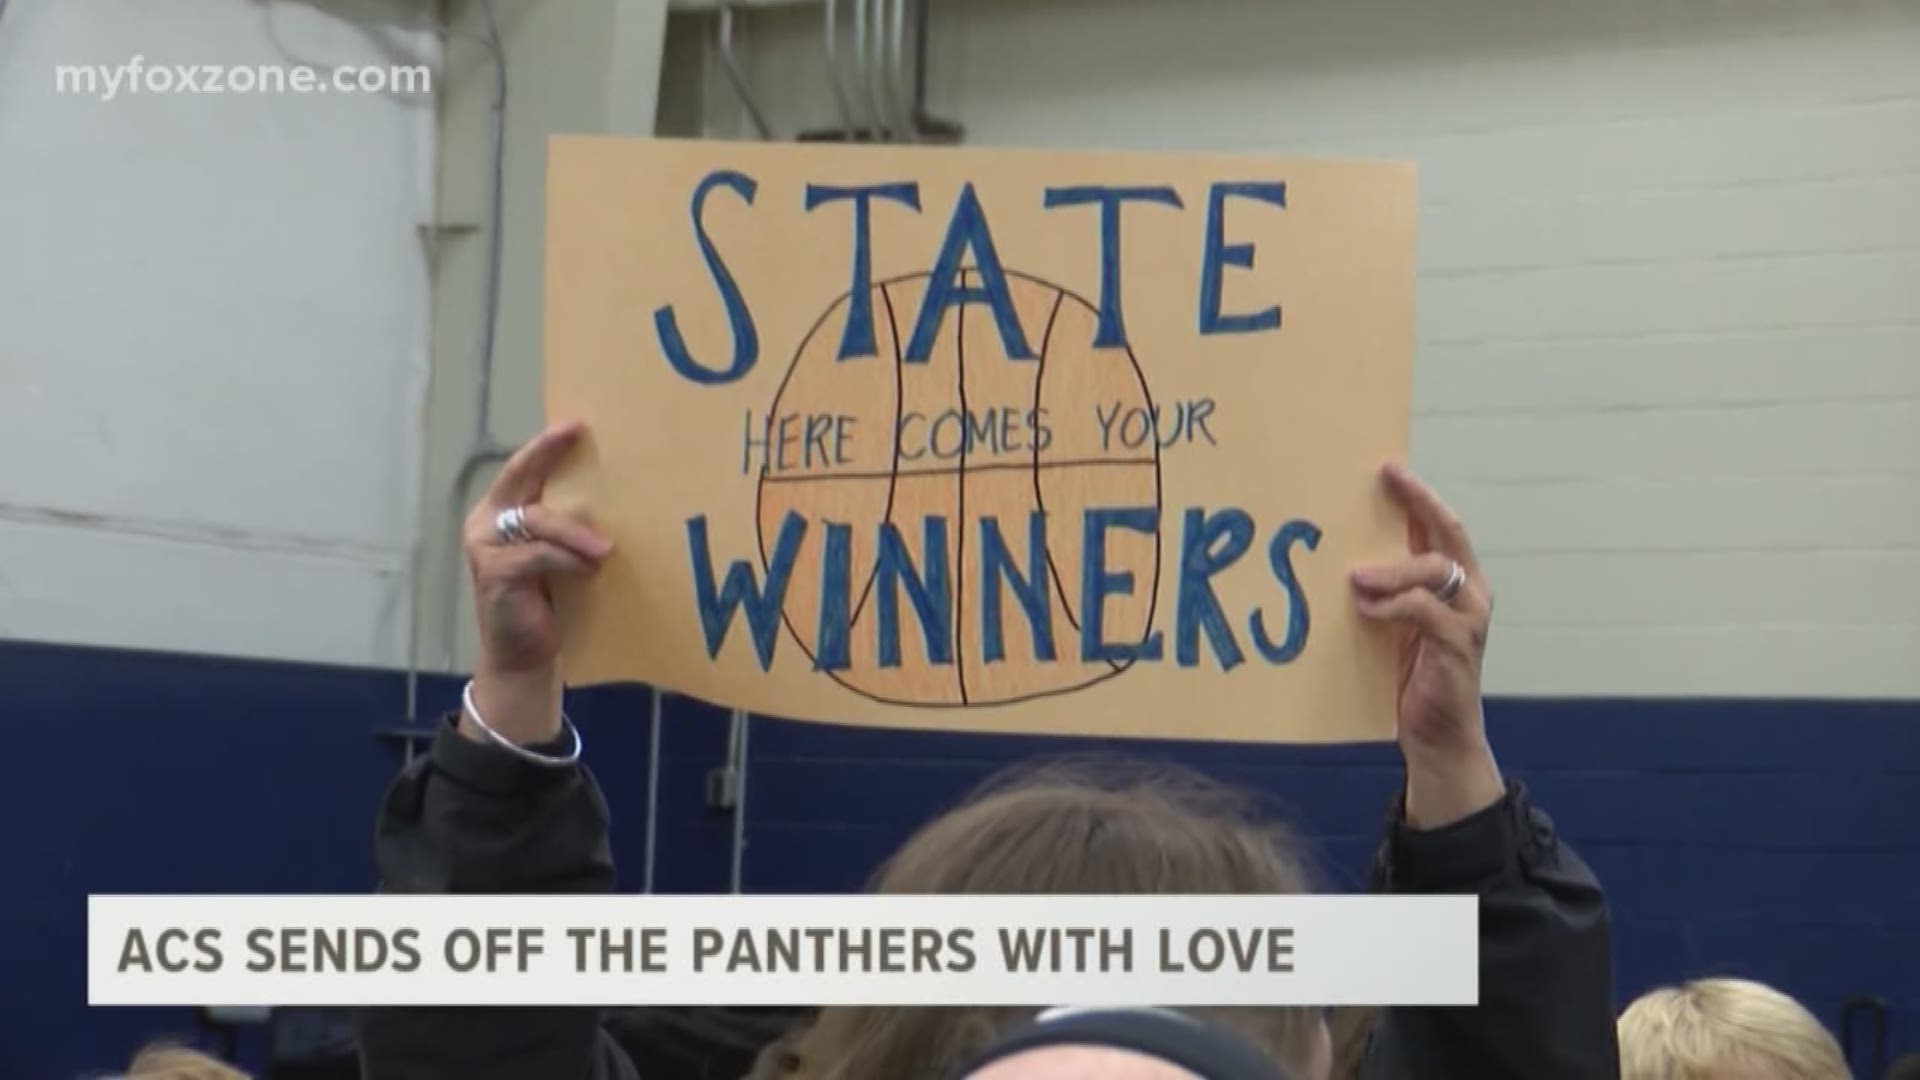 The ACS Panthers boys basketball team will tip off in the State Semifinal basketball game tomorrow. The whole school came out to let the team know they've got their fellow Panthers backs.